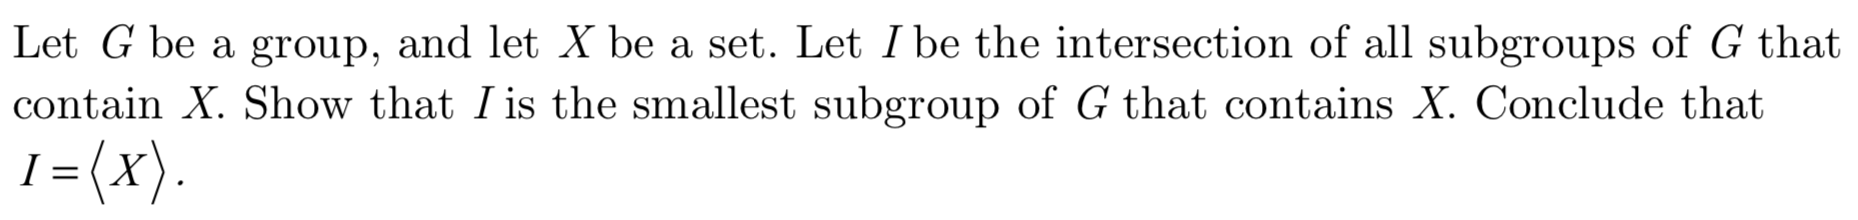 Let G be a group, and let X be a set. Let I be the intersection of all subgroups of G that
contain X. Show that I is the smallest subgroup of G that contains X. Conclude that
1= (x)
I
